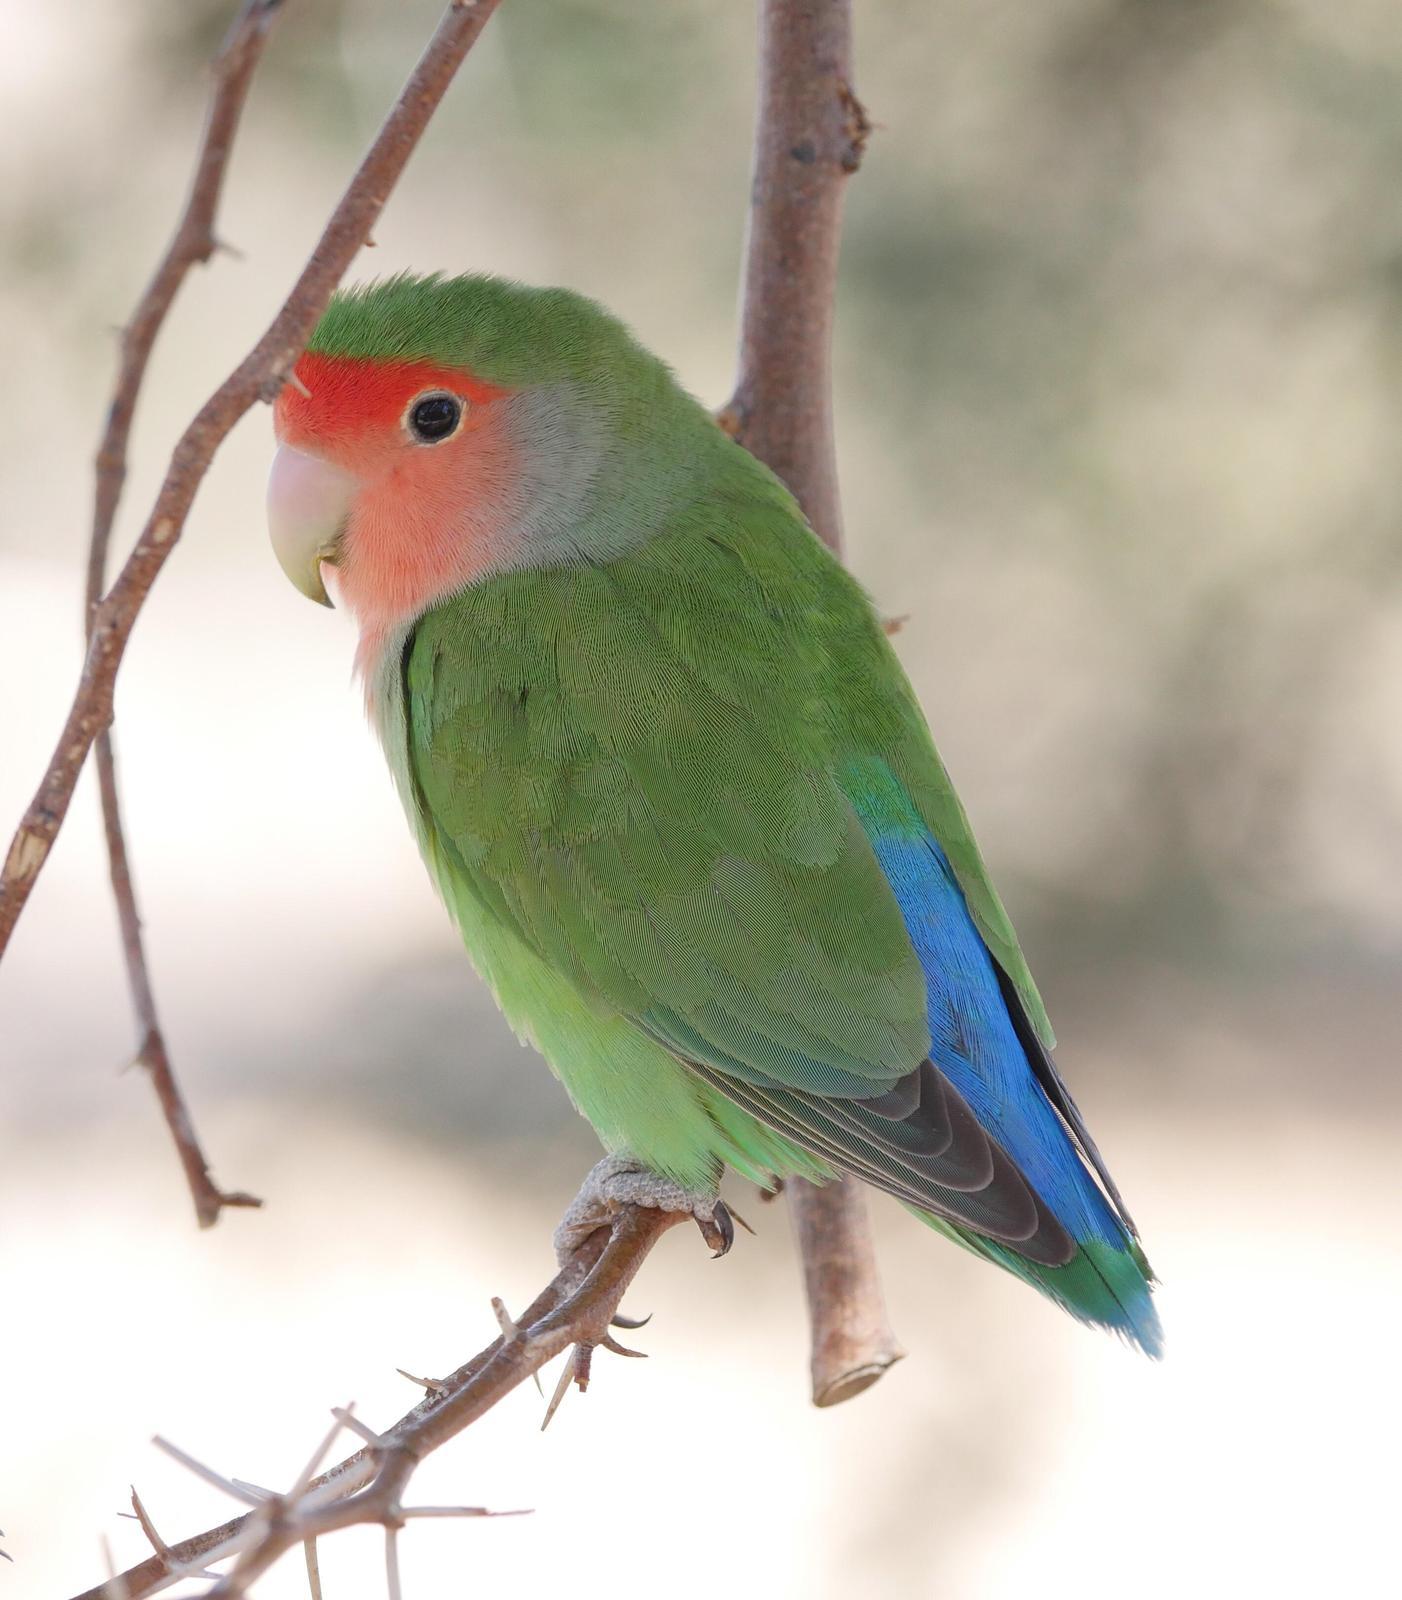 Rosy-faced Lovebird Photo by Peter Lowe